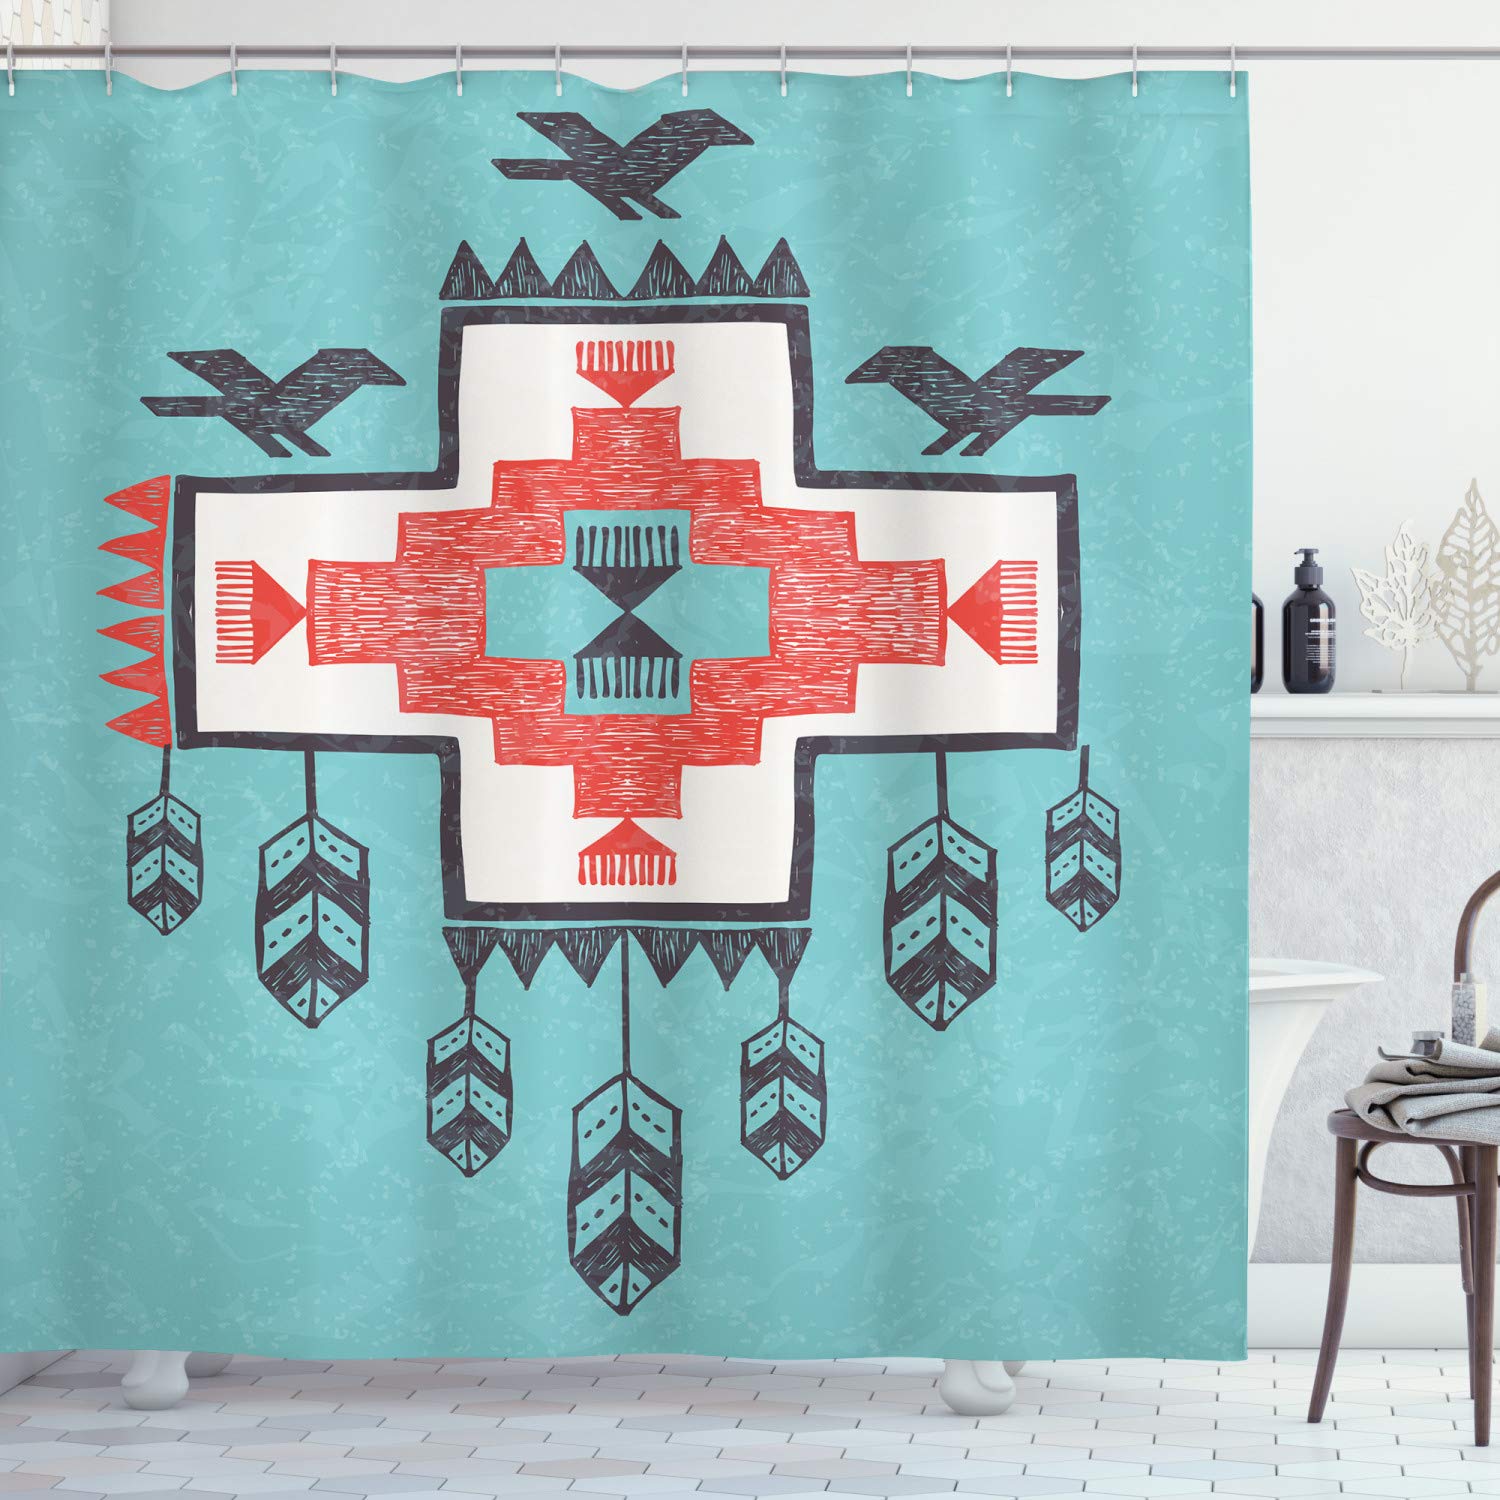 Ambesonne Tribal Shower Curtain, Hand Drawn Dreamcathcher Folkloric Birds Image, Cloth Fabric Bathroom Decor Set with Hooks, 84" Extra Long, Teal Coral